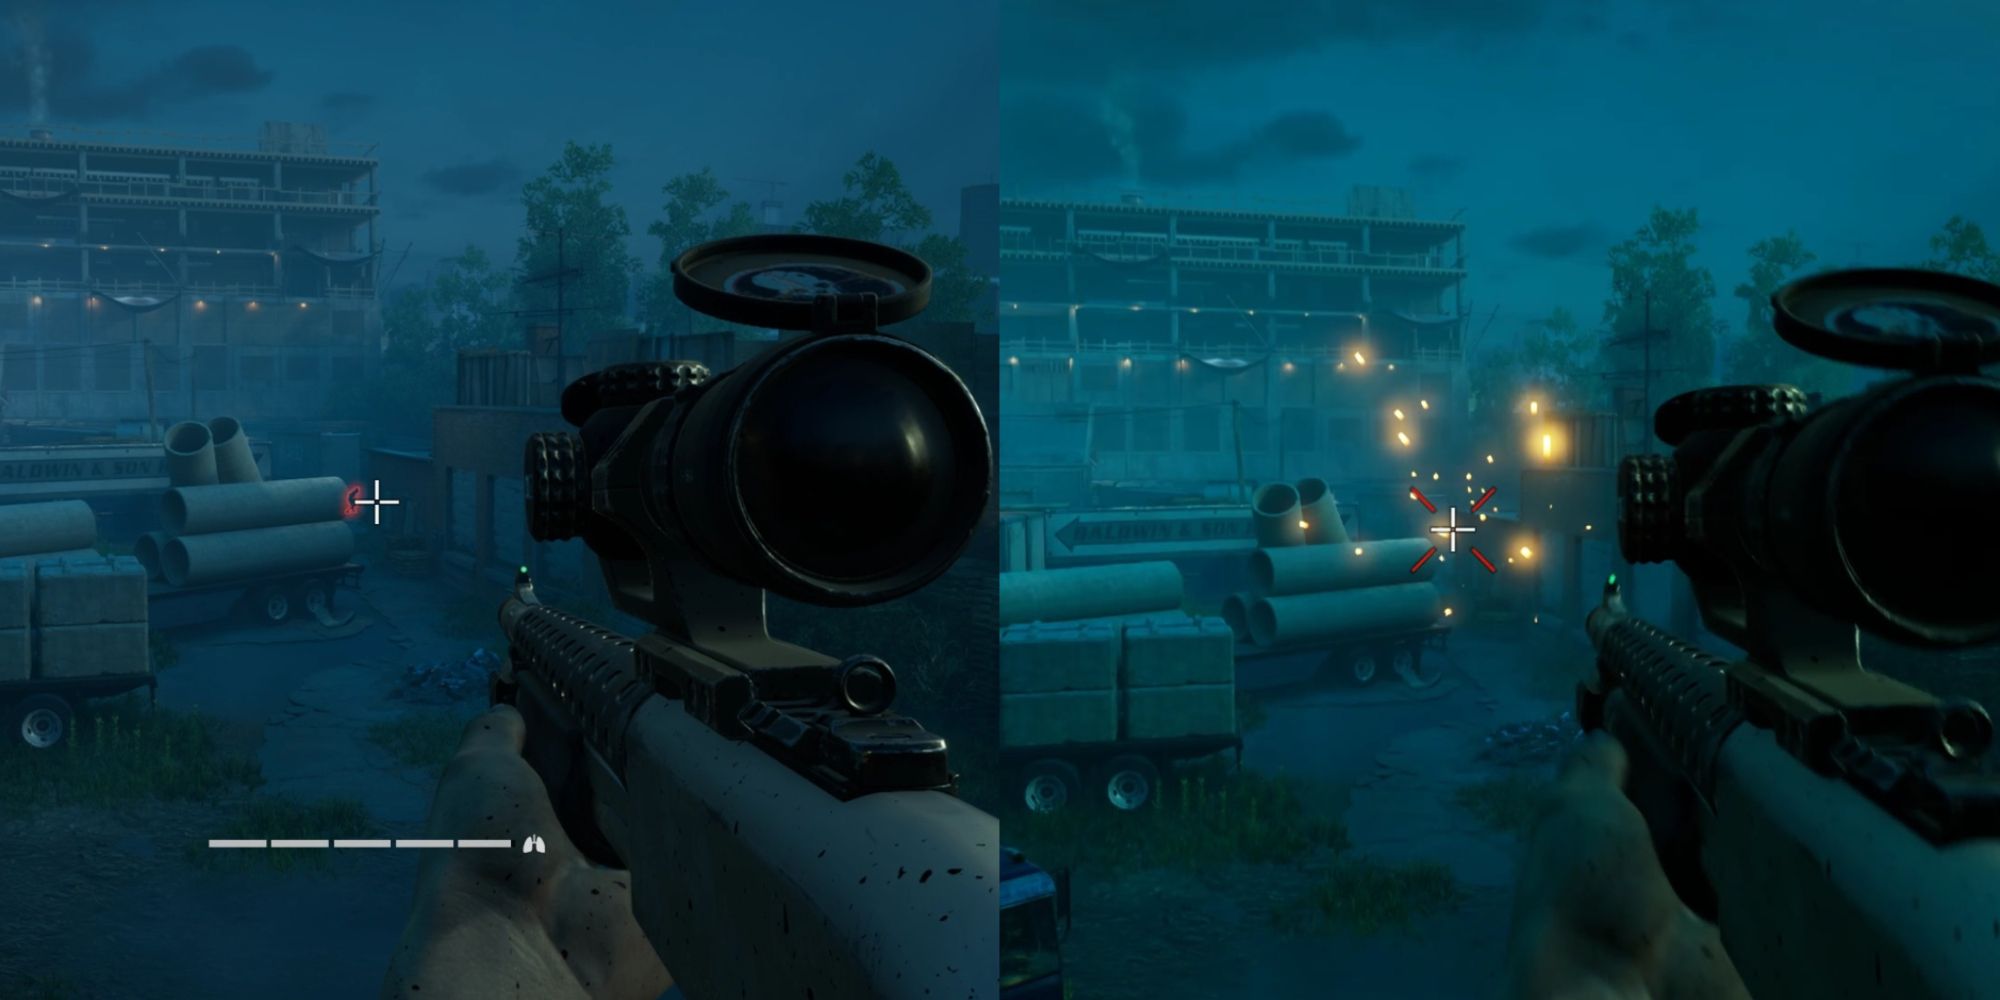 A distant Mutation sighted in red (left), the same Mutation being dispatch (indicated by red hit marker) on the right